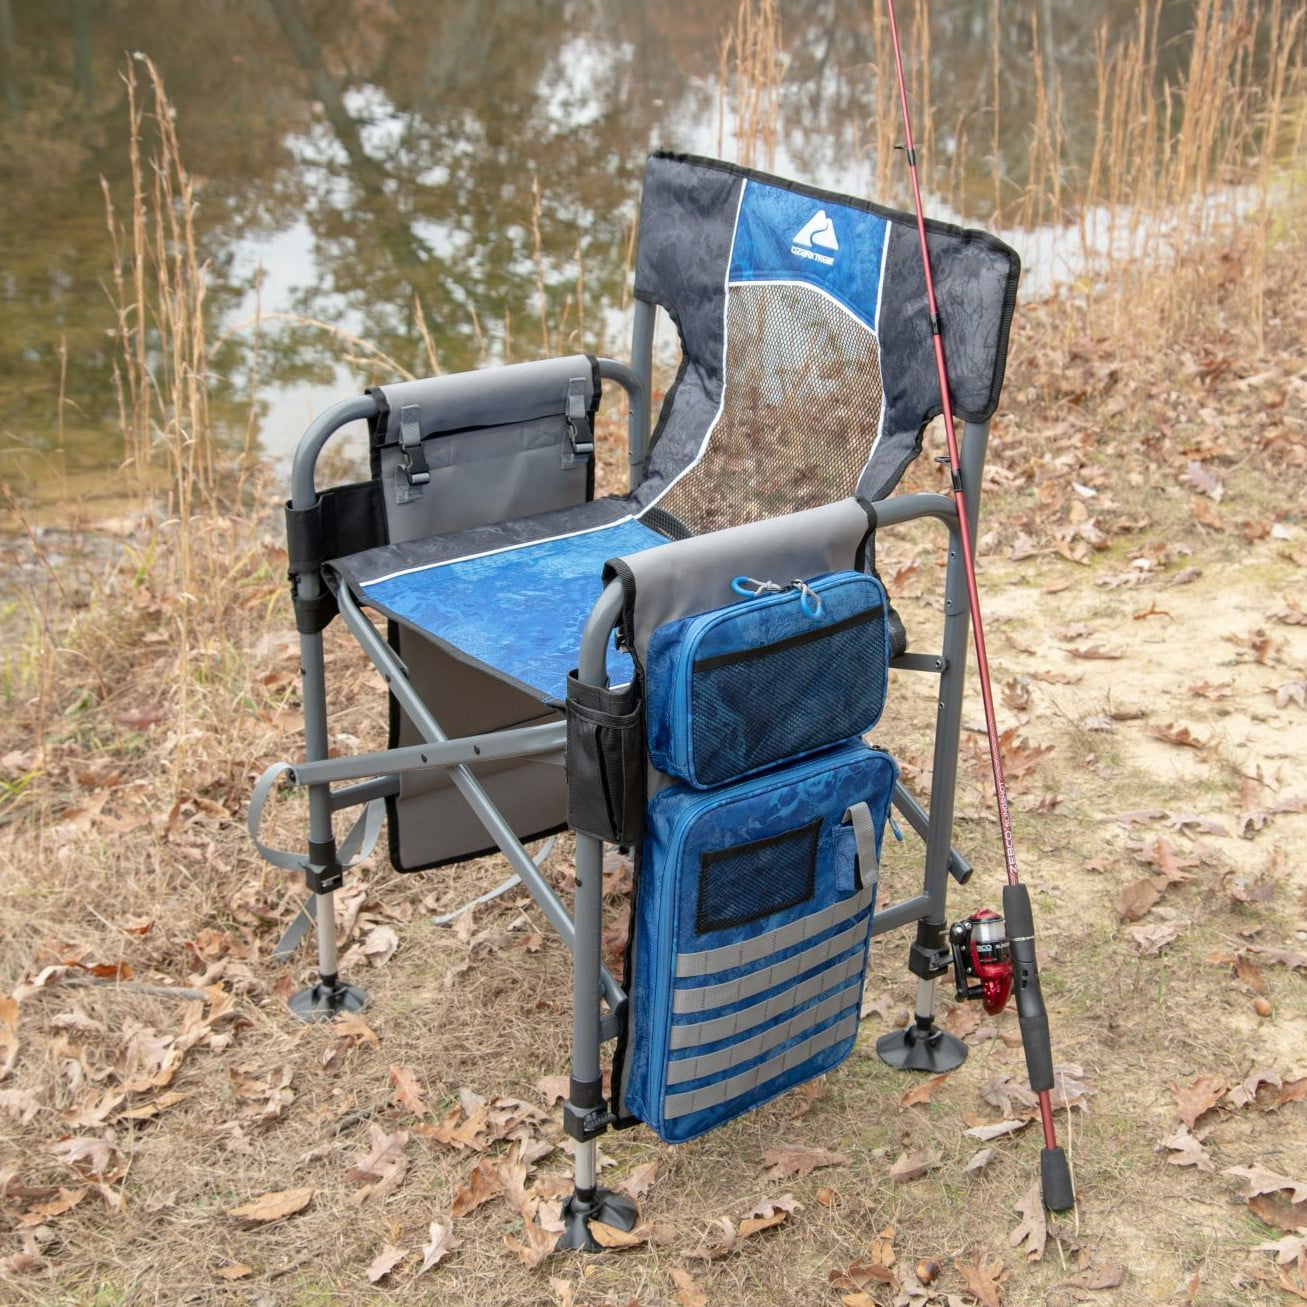 Ozark Trail Camping Director Fishing Chair, Blue, Adult